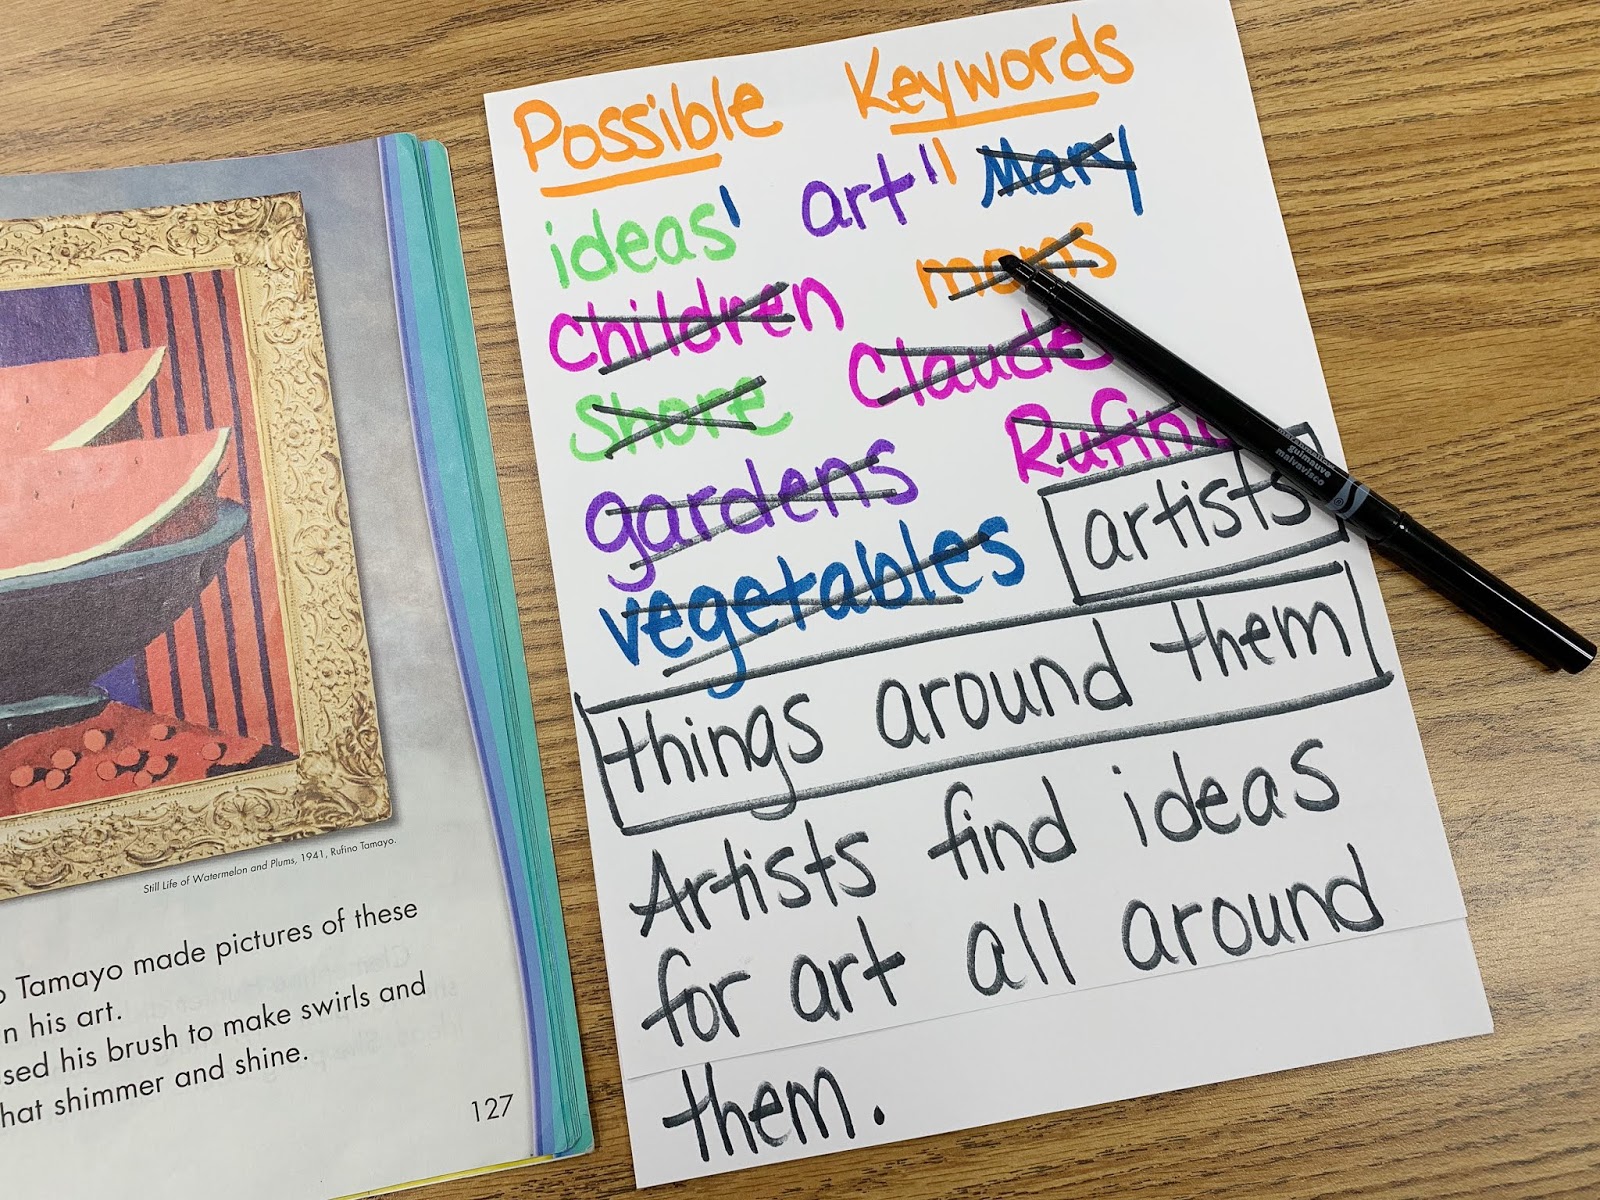 Text showing art and possible keywords paper with words crossed out, words boxed, and the main idea sentence